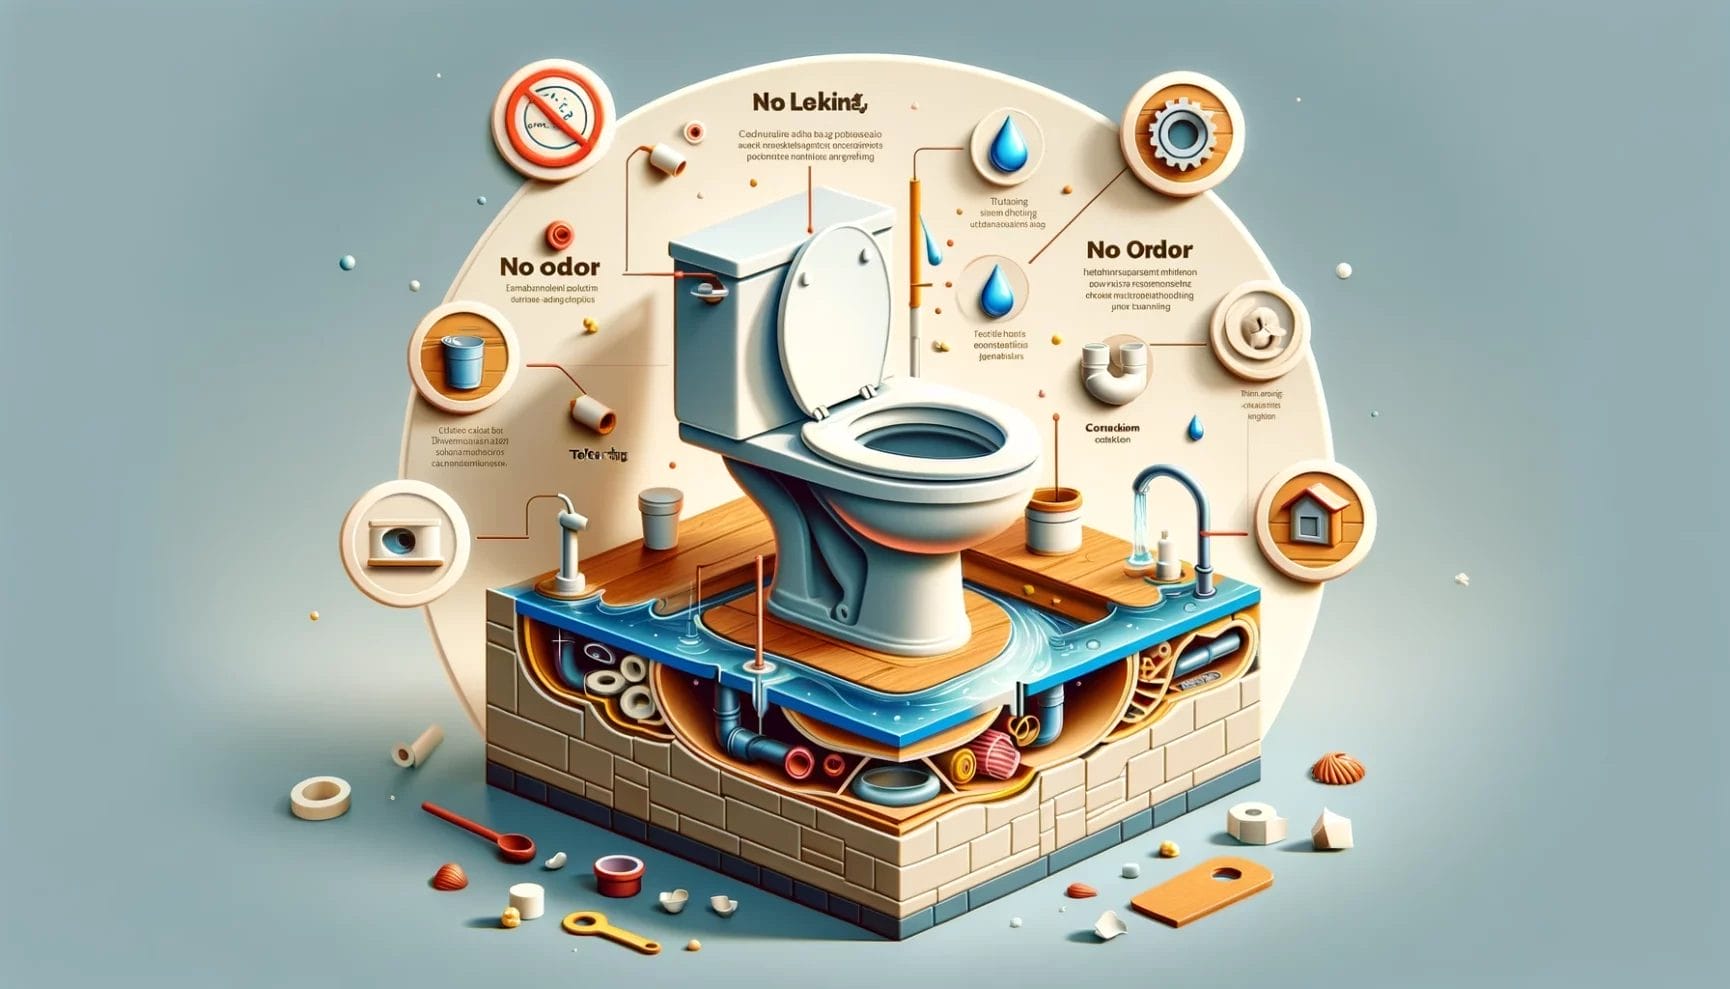 An illustrative cross-section of a high-tech toilet highlighting its odor-eliminating features and advanced functionality.